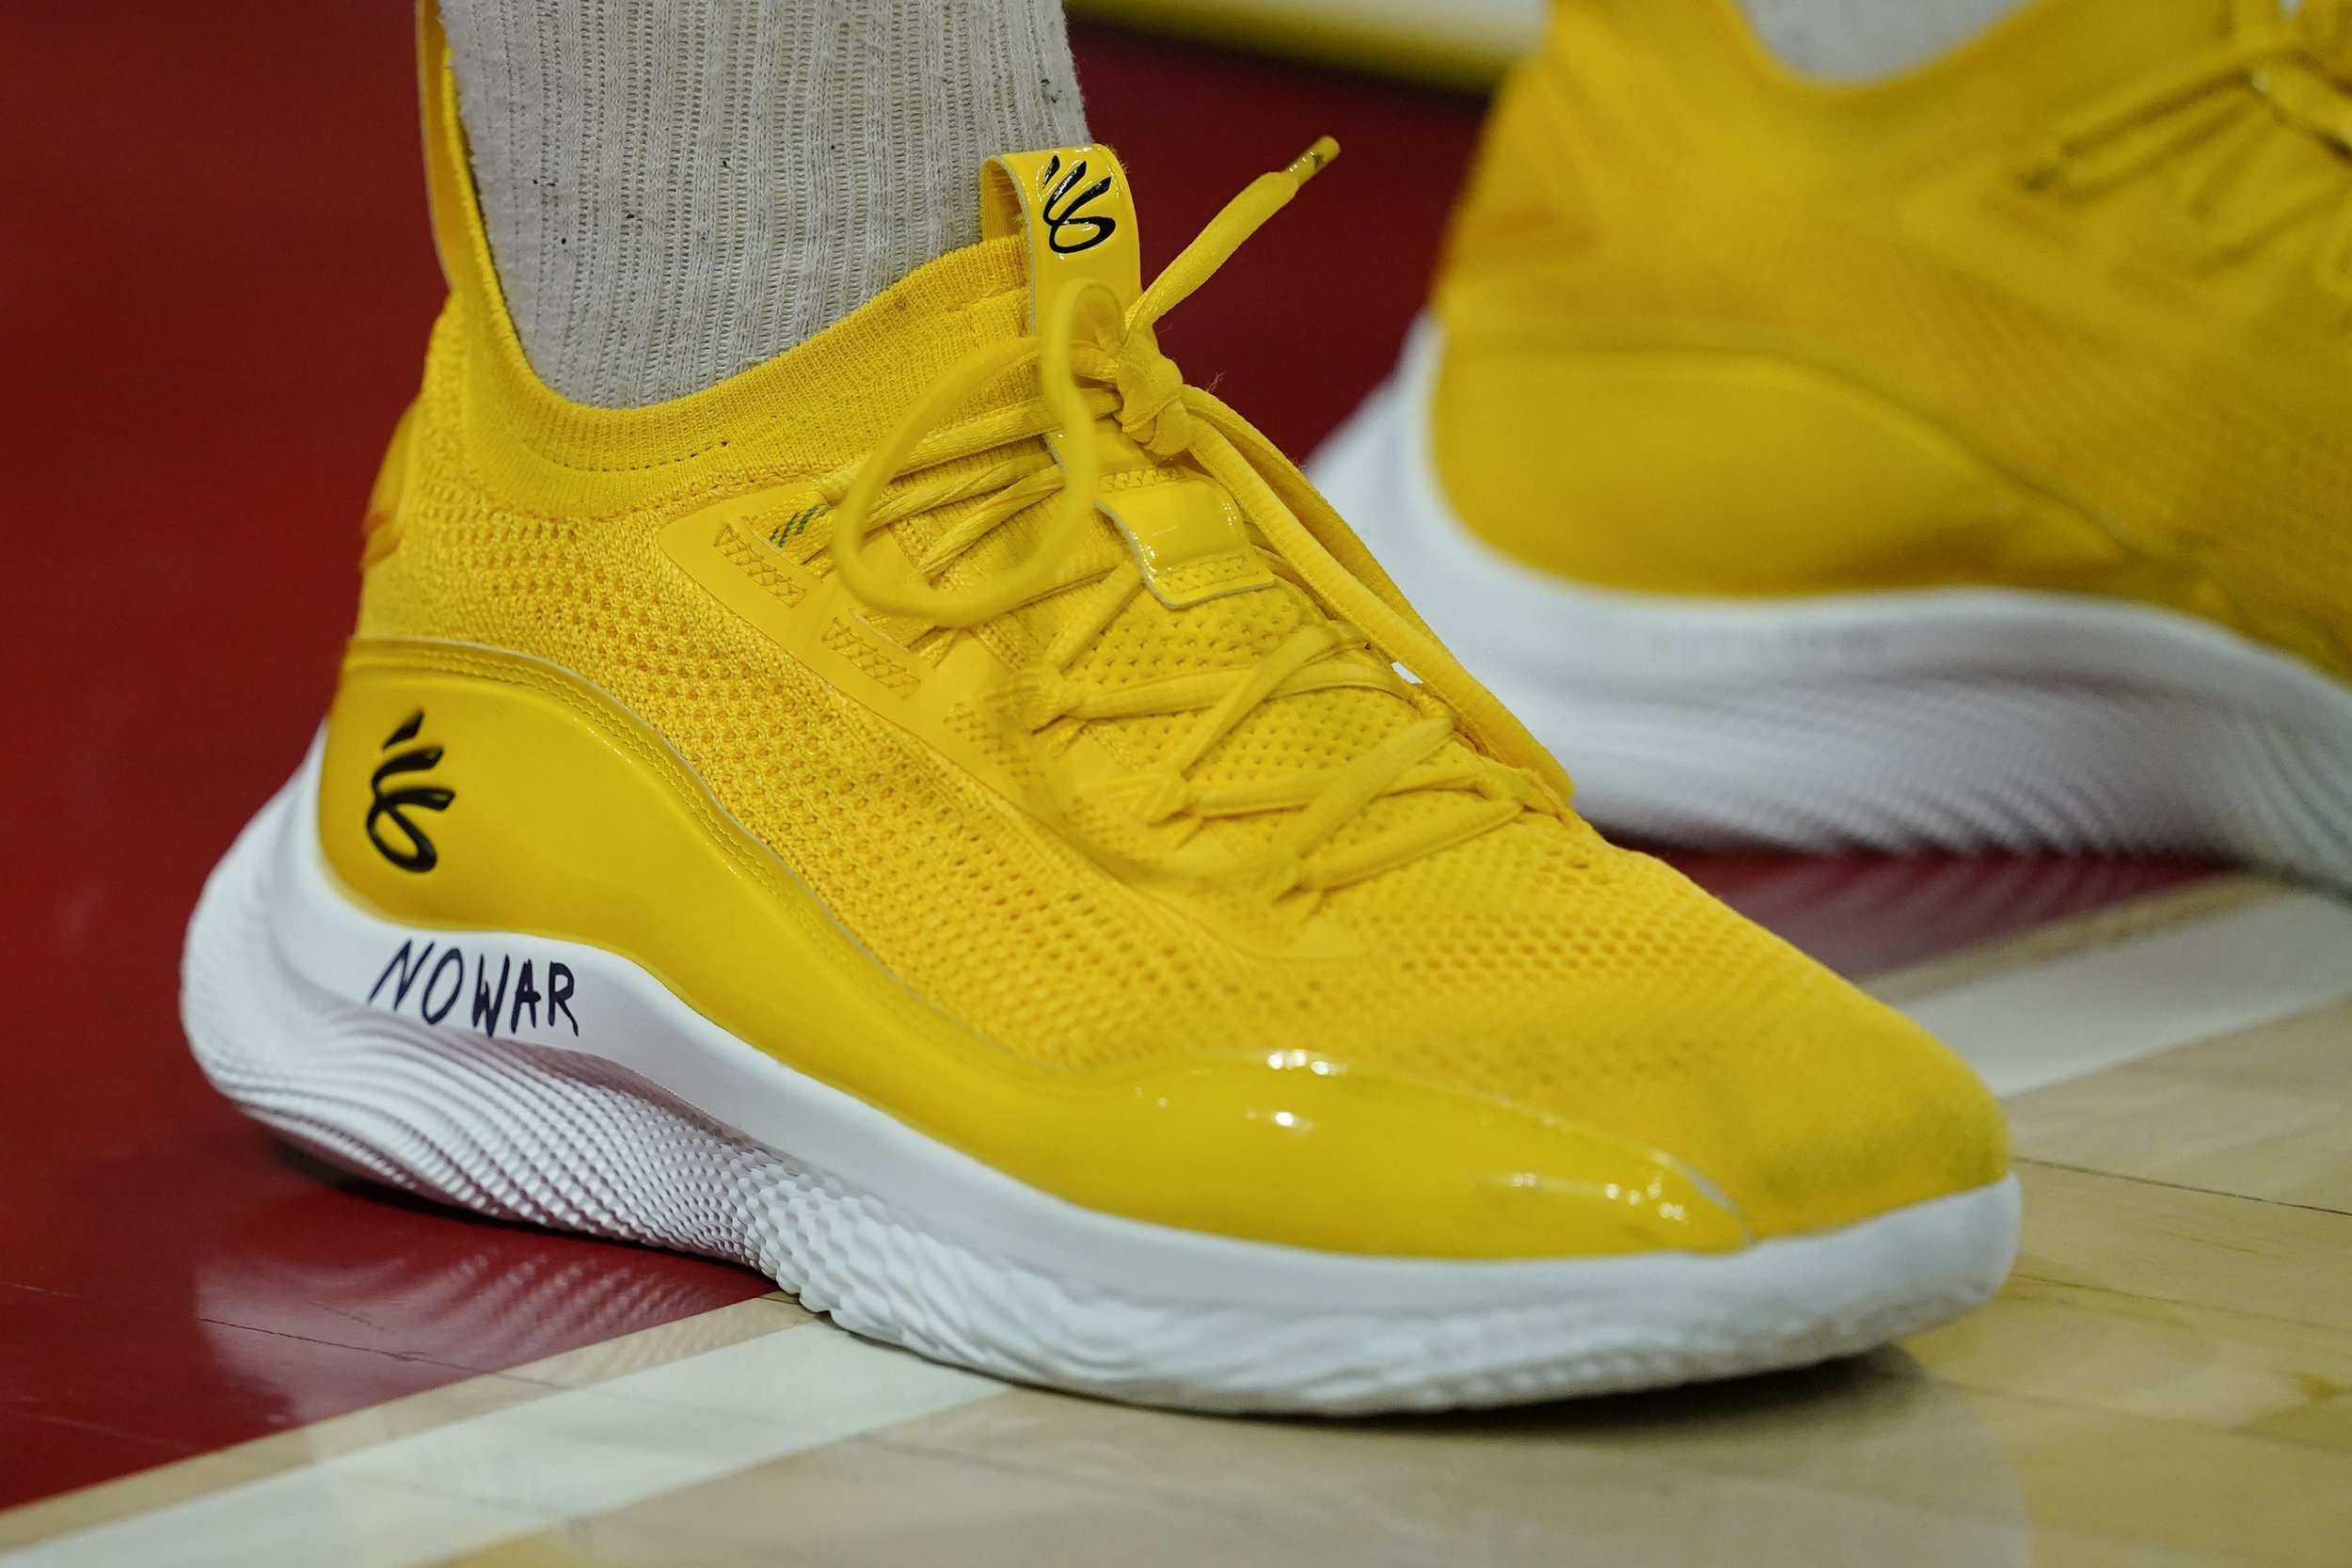  The words "No War" are written on the shoes of Maryland forward Pavlo Dziuba, who was born in Kyiv, Ukraine, as he stands for the United States national anthem prior to an NCAA college basketball game against Ohio State, Feb. 27, 2022, in College Pa